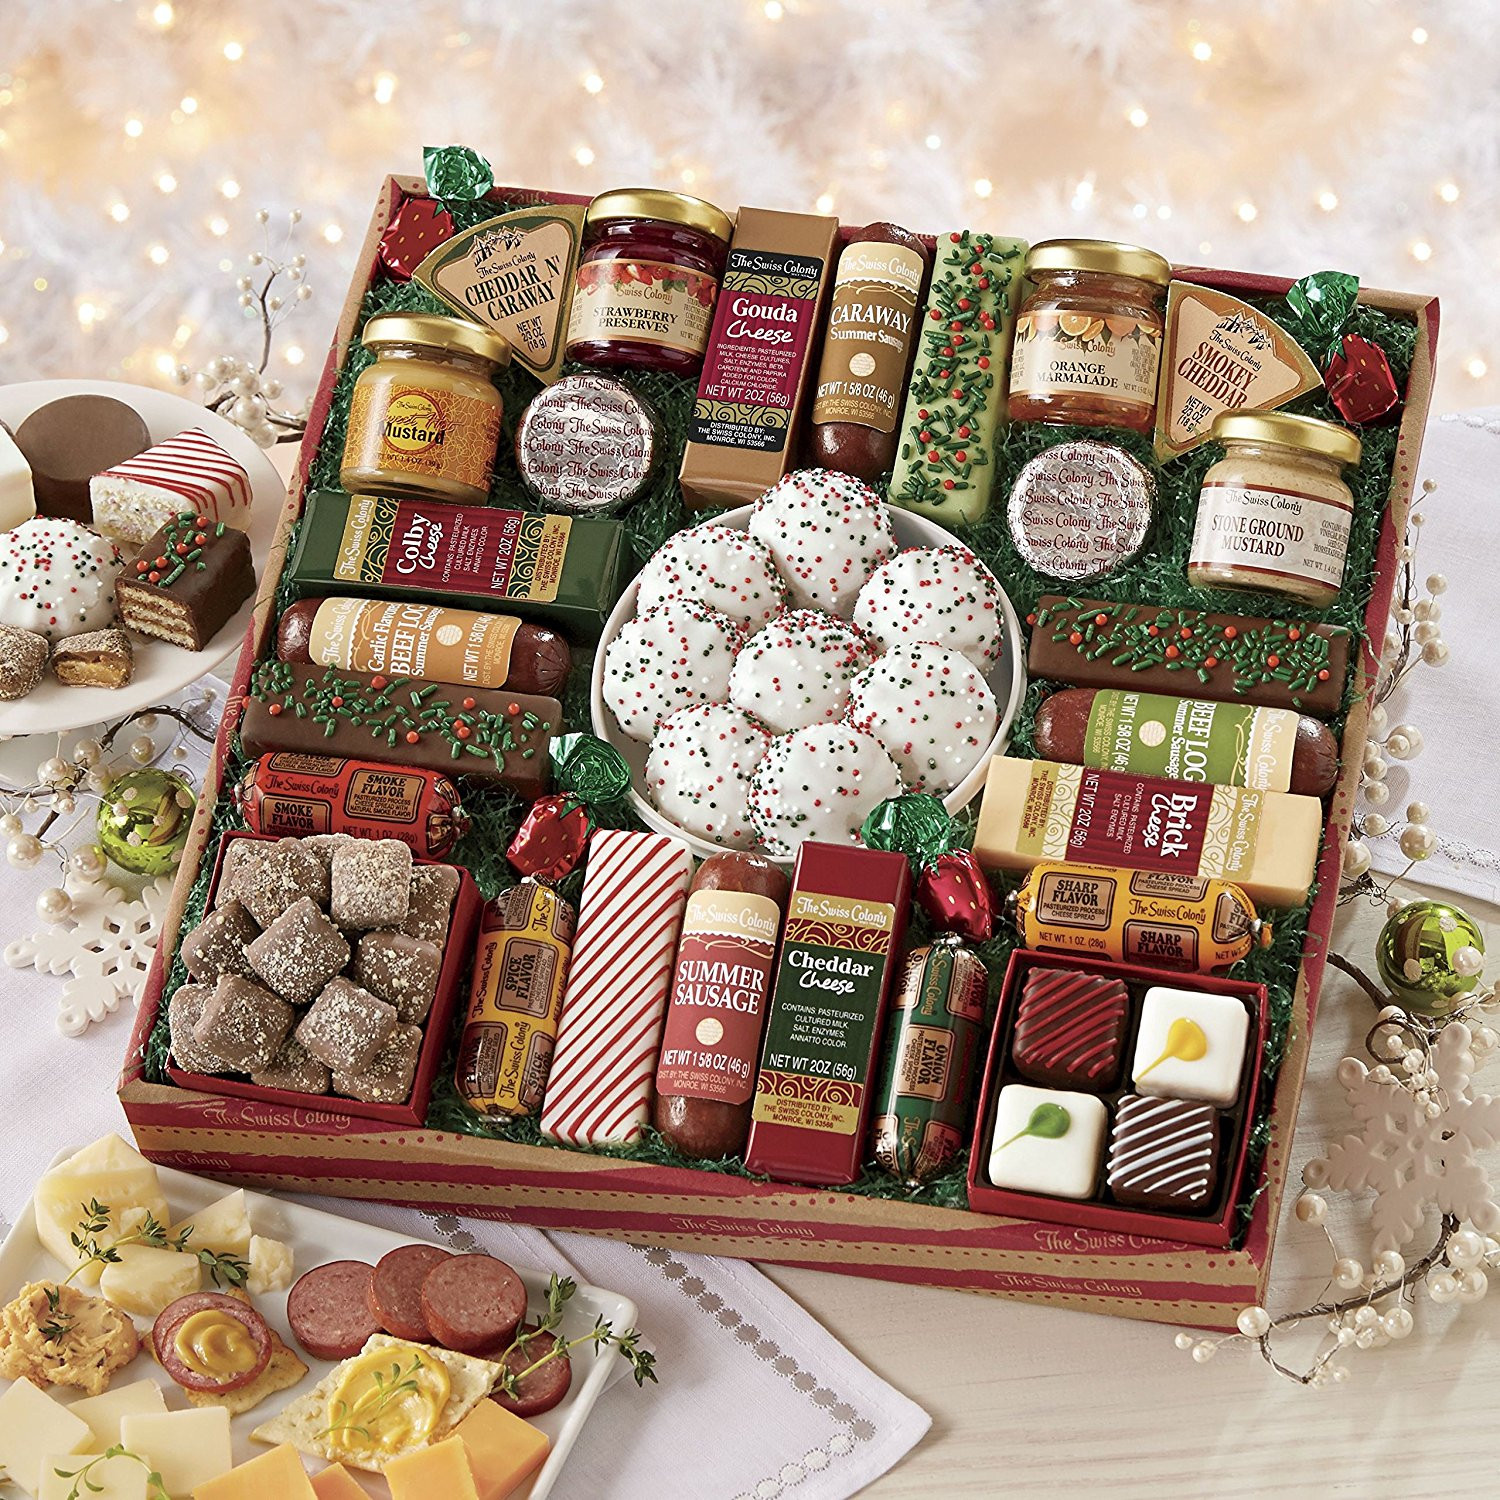 Food Gift Baskets Ideas
 Gourmet Food Gift Baskets Best Cheeses Sausages Meat